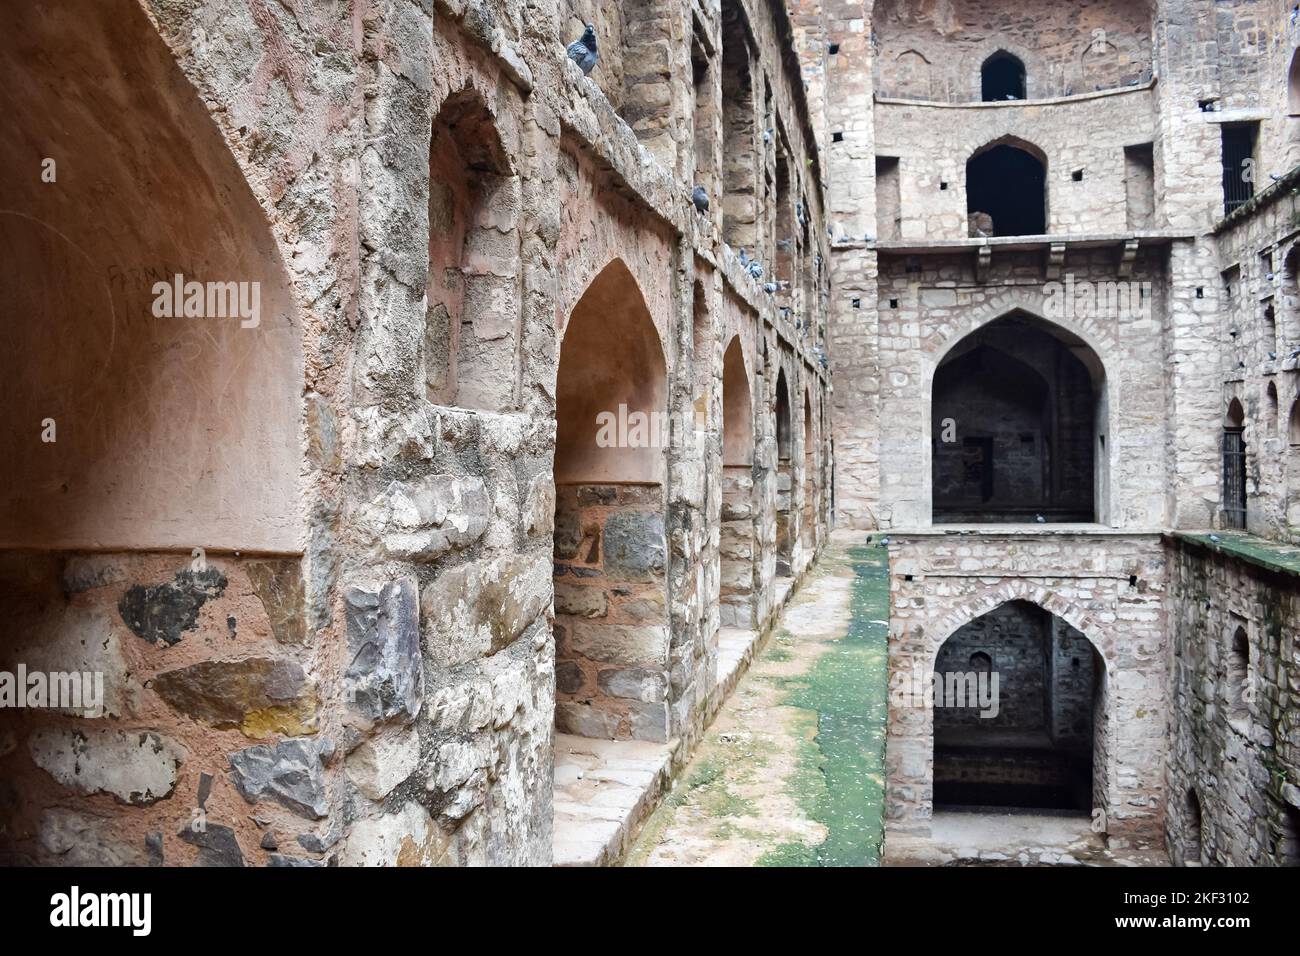 Agrasen Ki Baoli (Step Well) situated in the middle of Connaught placed New Delhi India, Old Ancient archaeology Construction Stock Photo